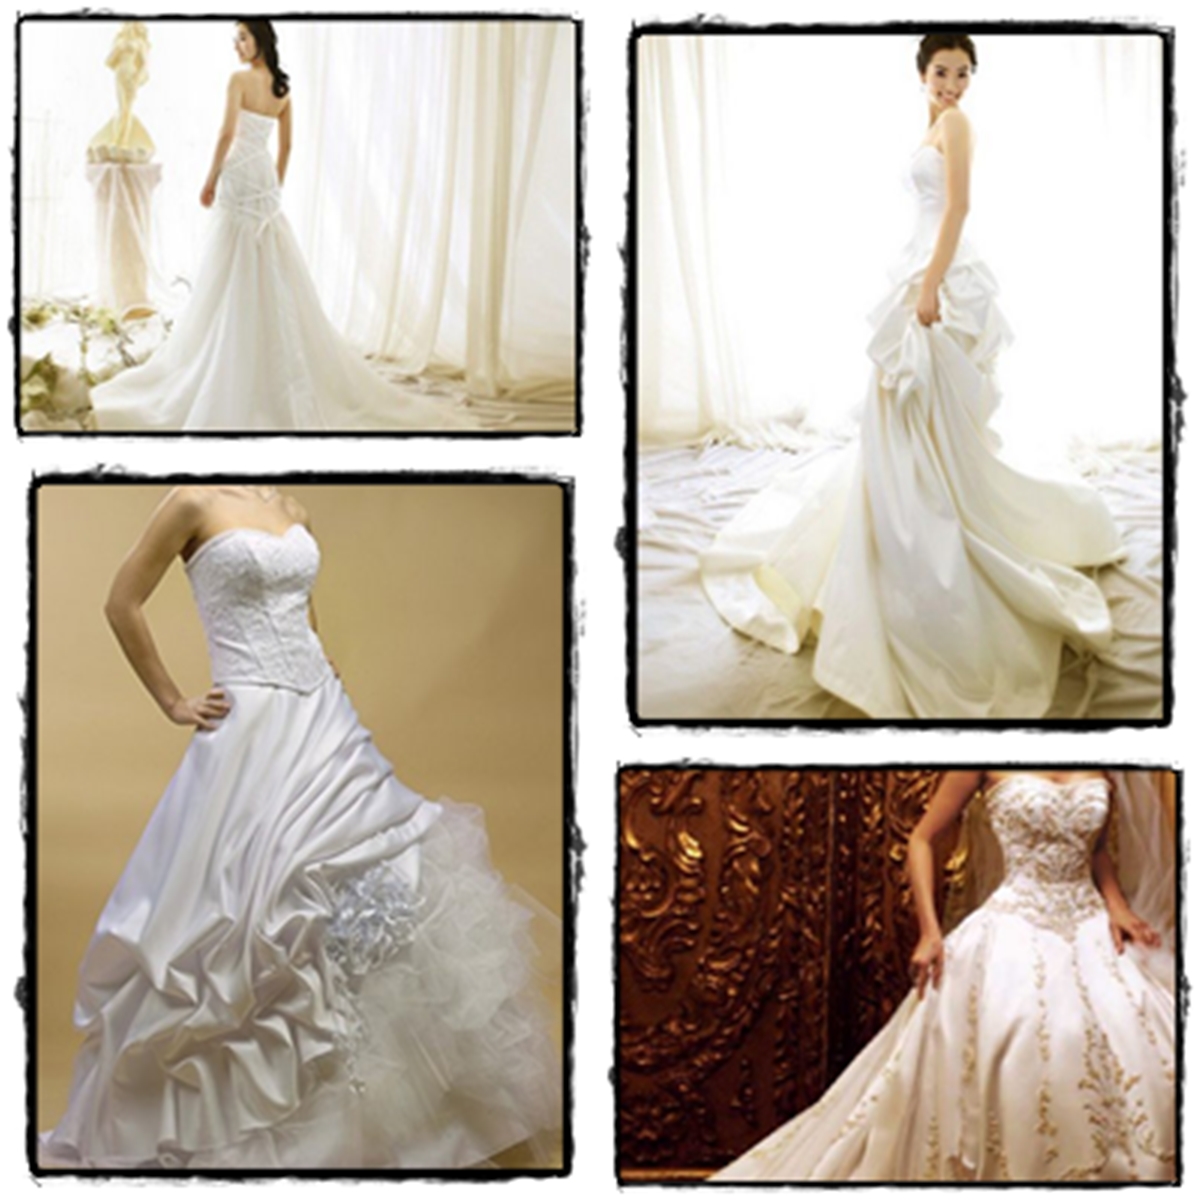 The best wedding dresses are